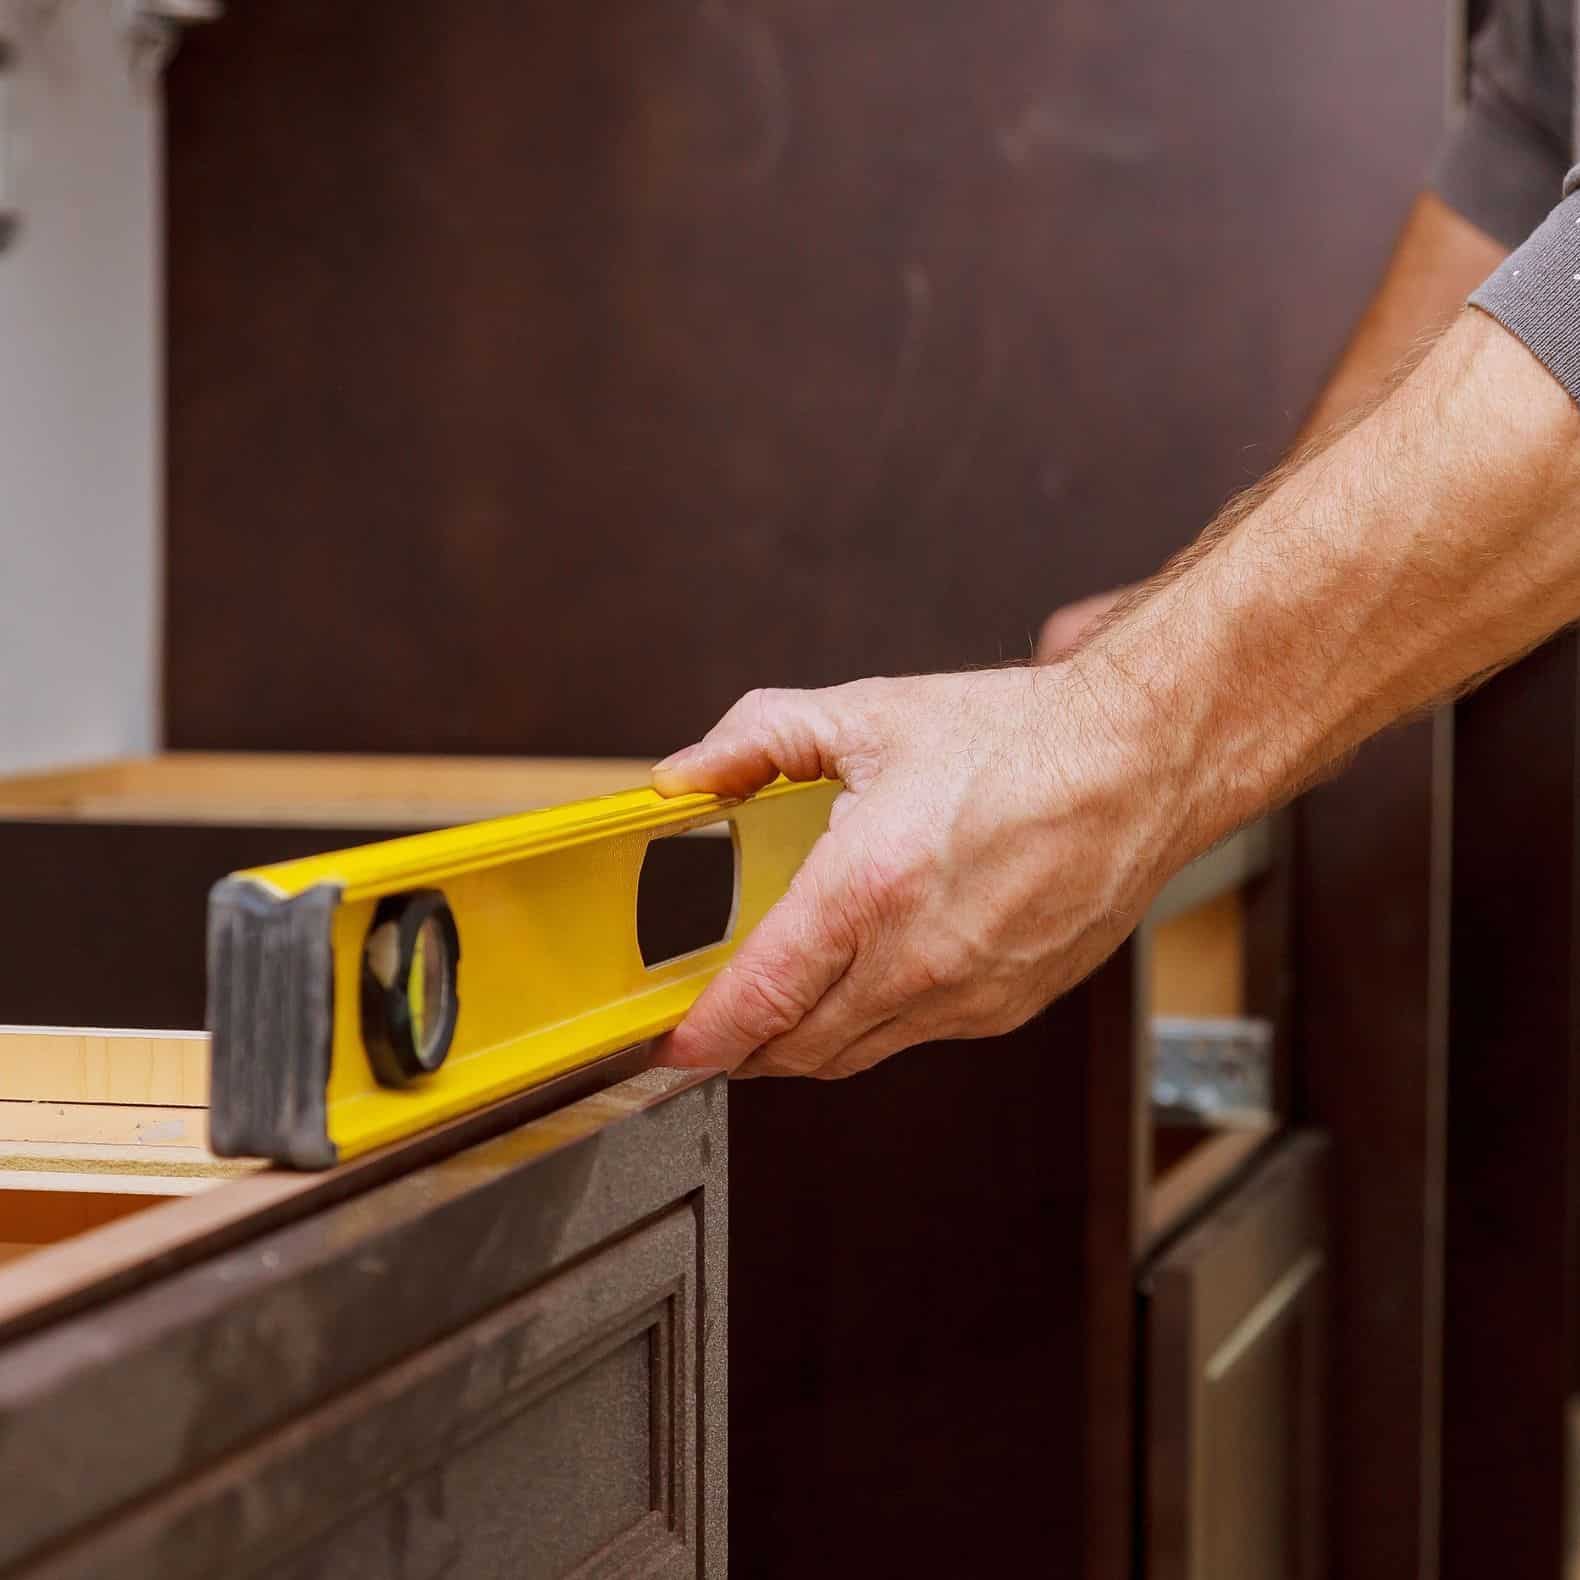 worker using yellow level on brown cabinets